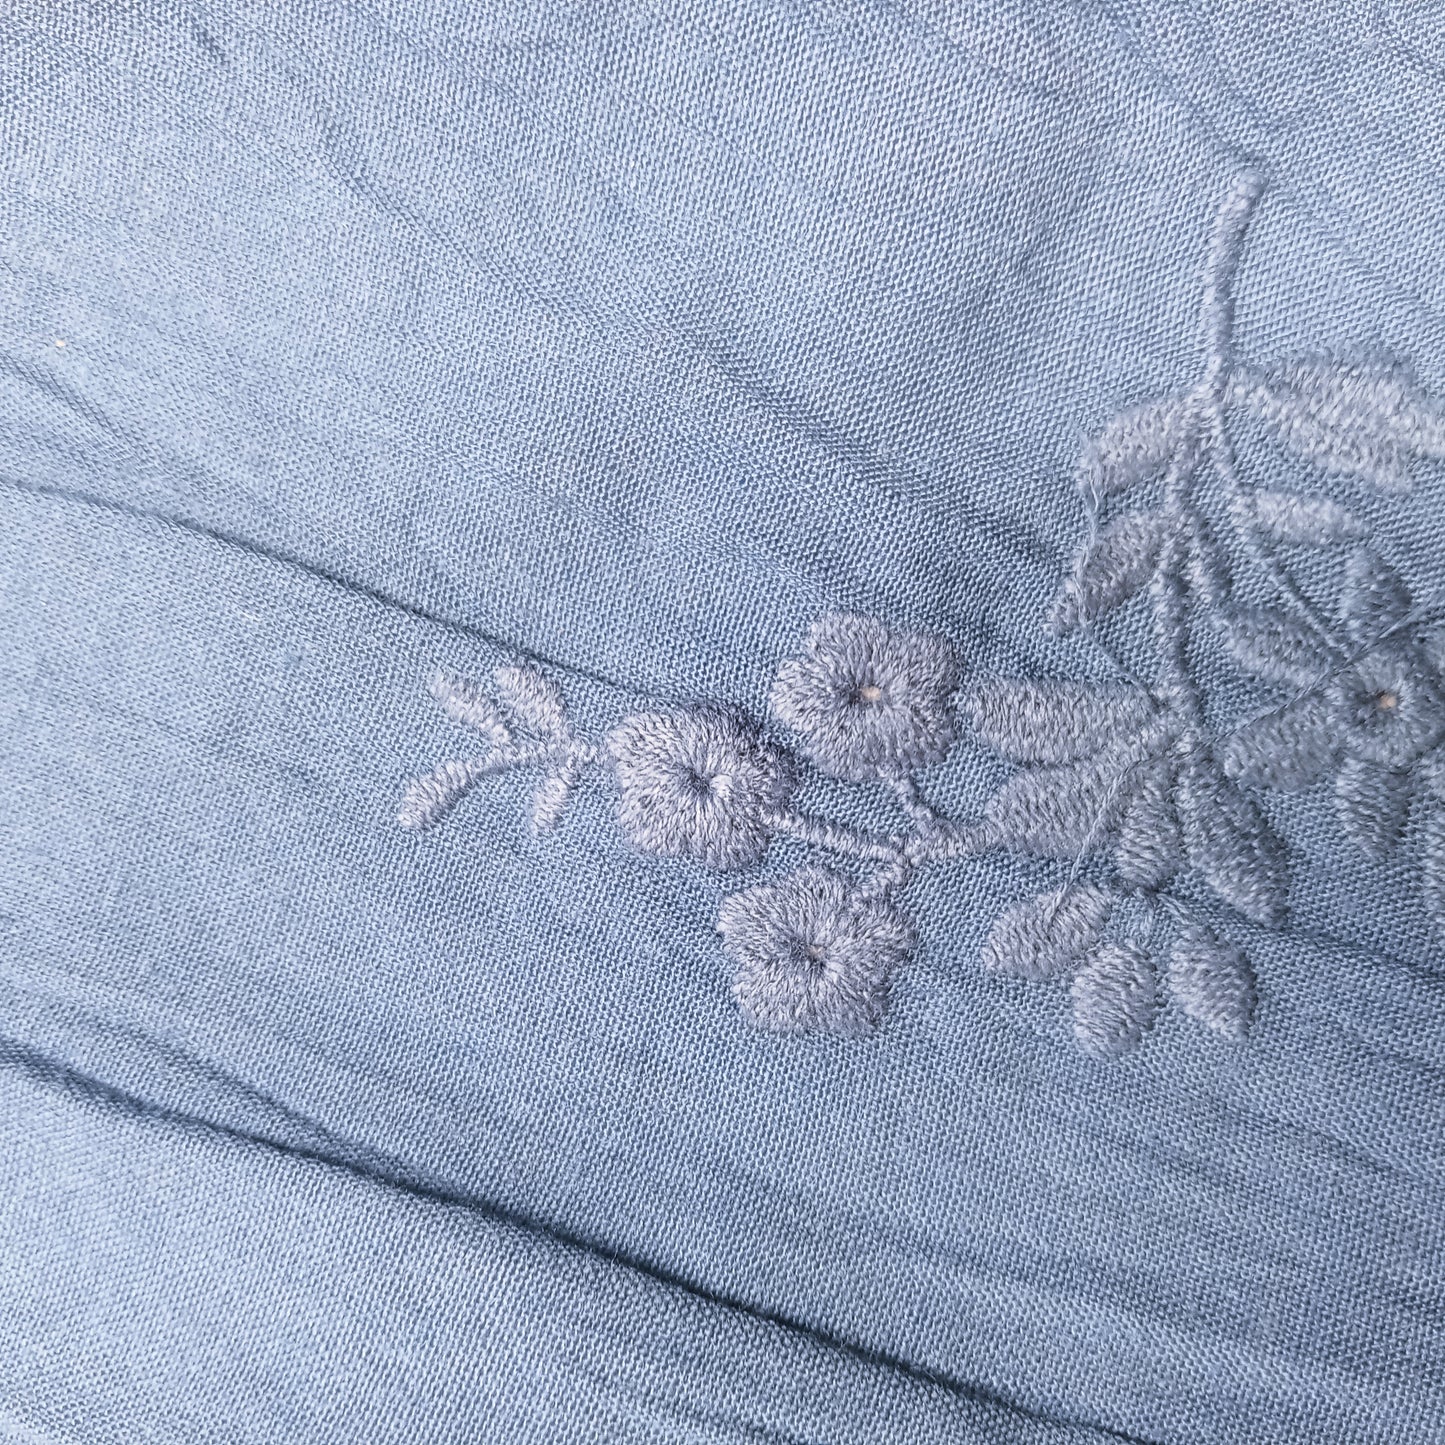 Crushed floral embroidered cotton fabric - 2.40mtrs